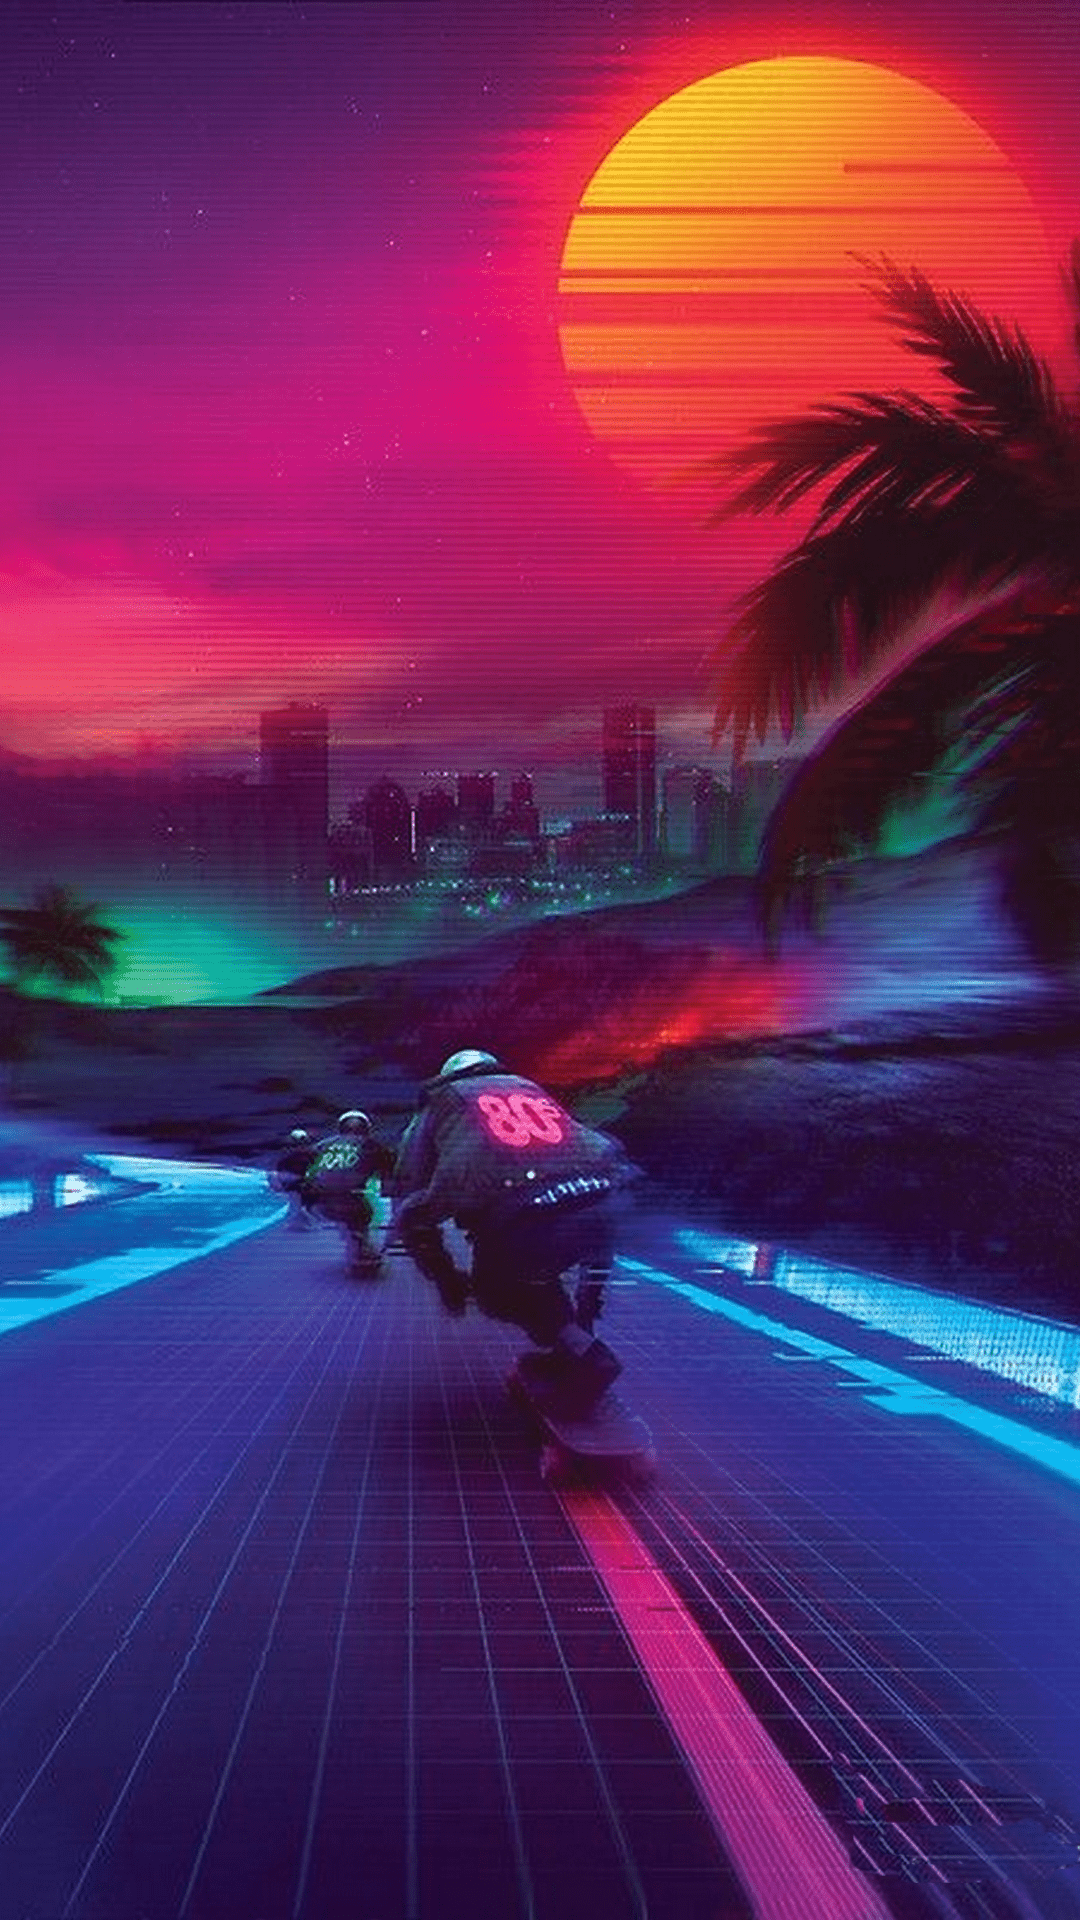 Two people riding skateboards, sunset in the background, synthwave wallpaper - Synthwave